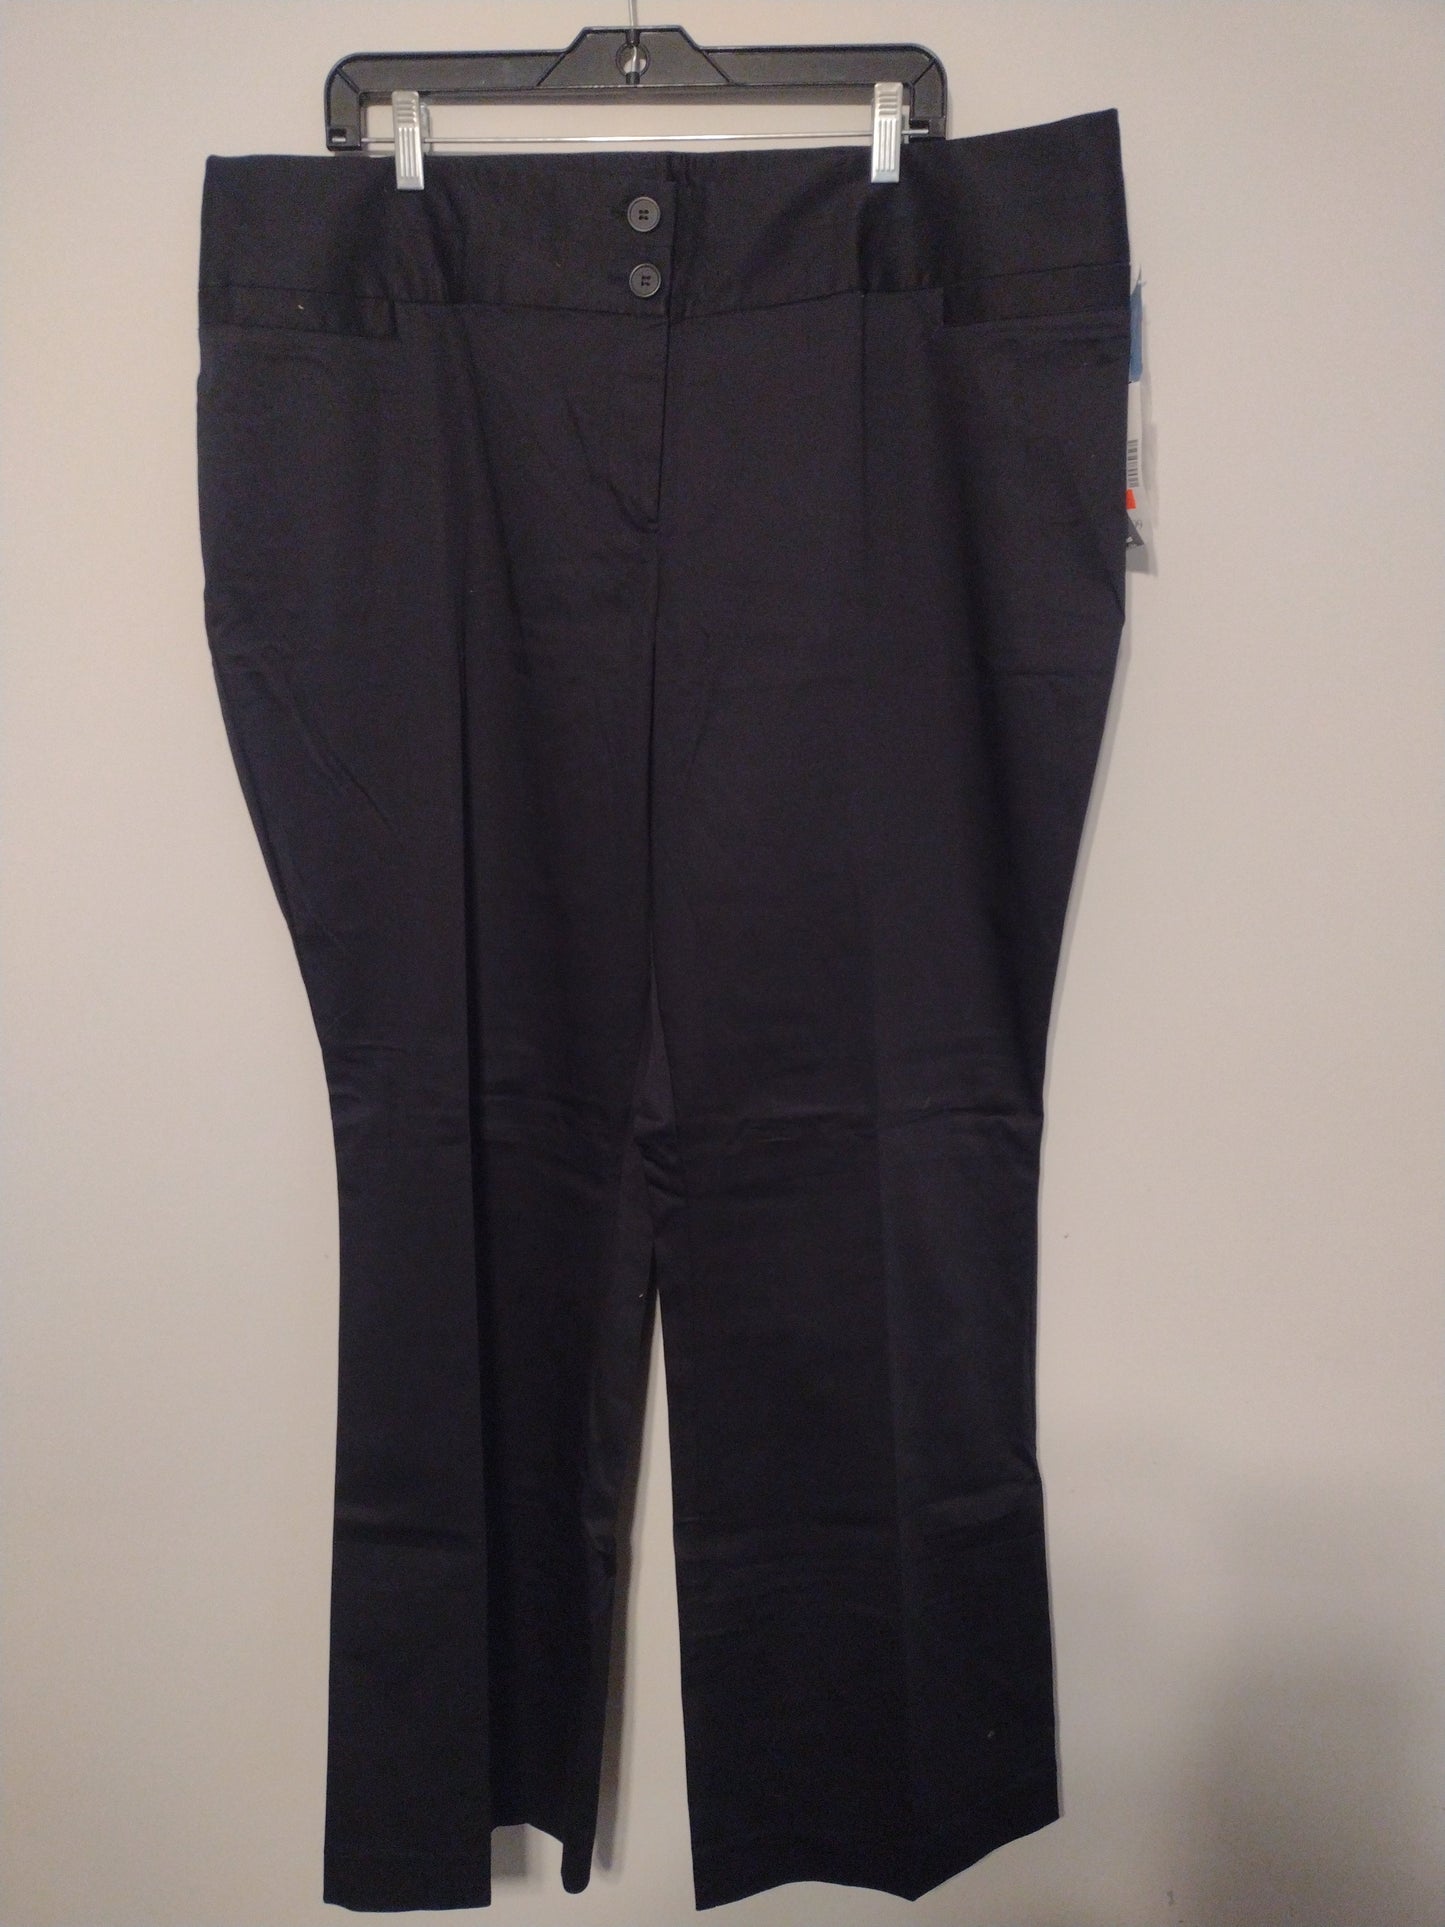 Pants Ankle By Fashion Bug  Size: 20